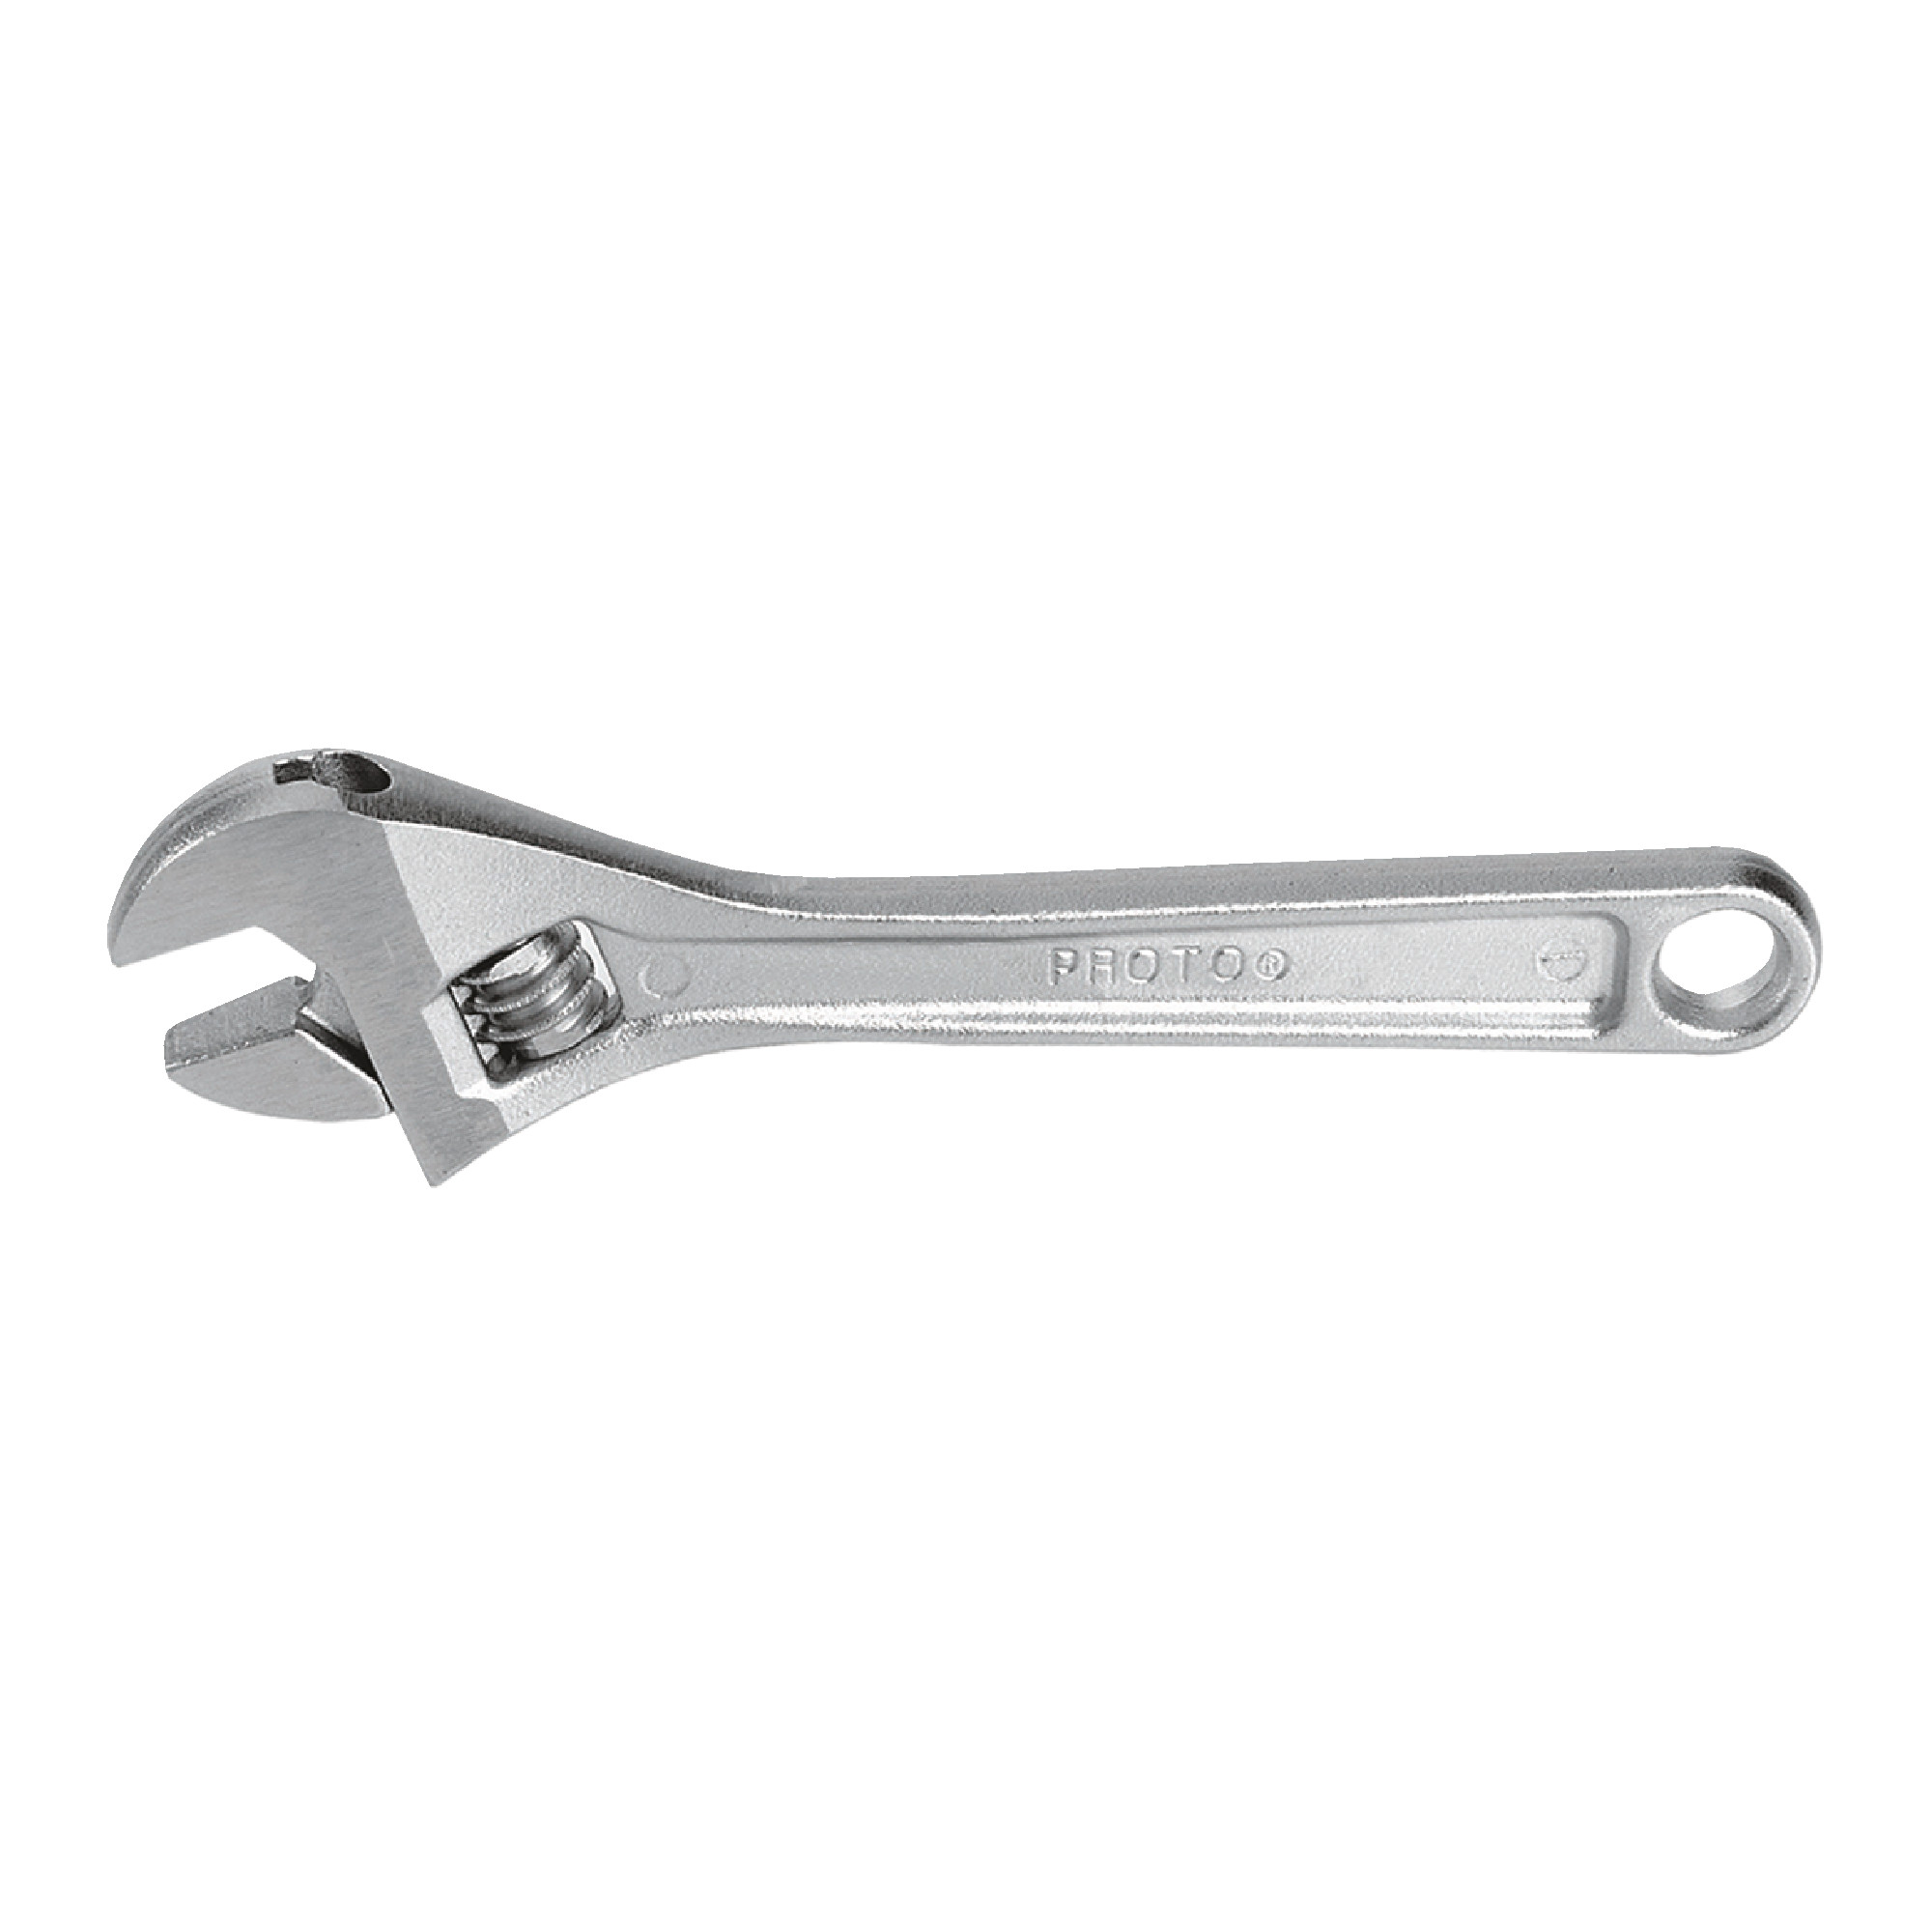 J715 1-11/16" Adjustable Wrench With Satin Chrome Finish